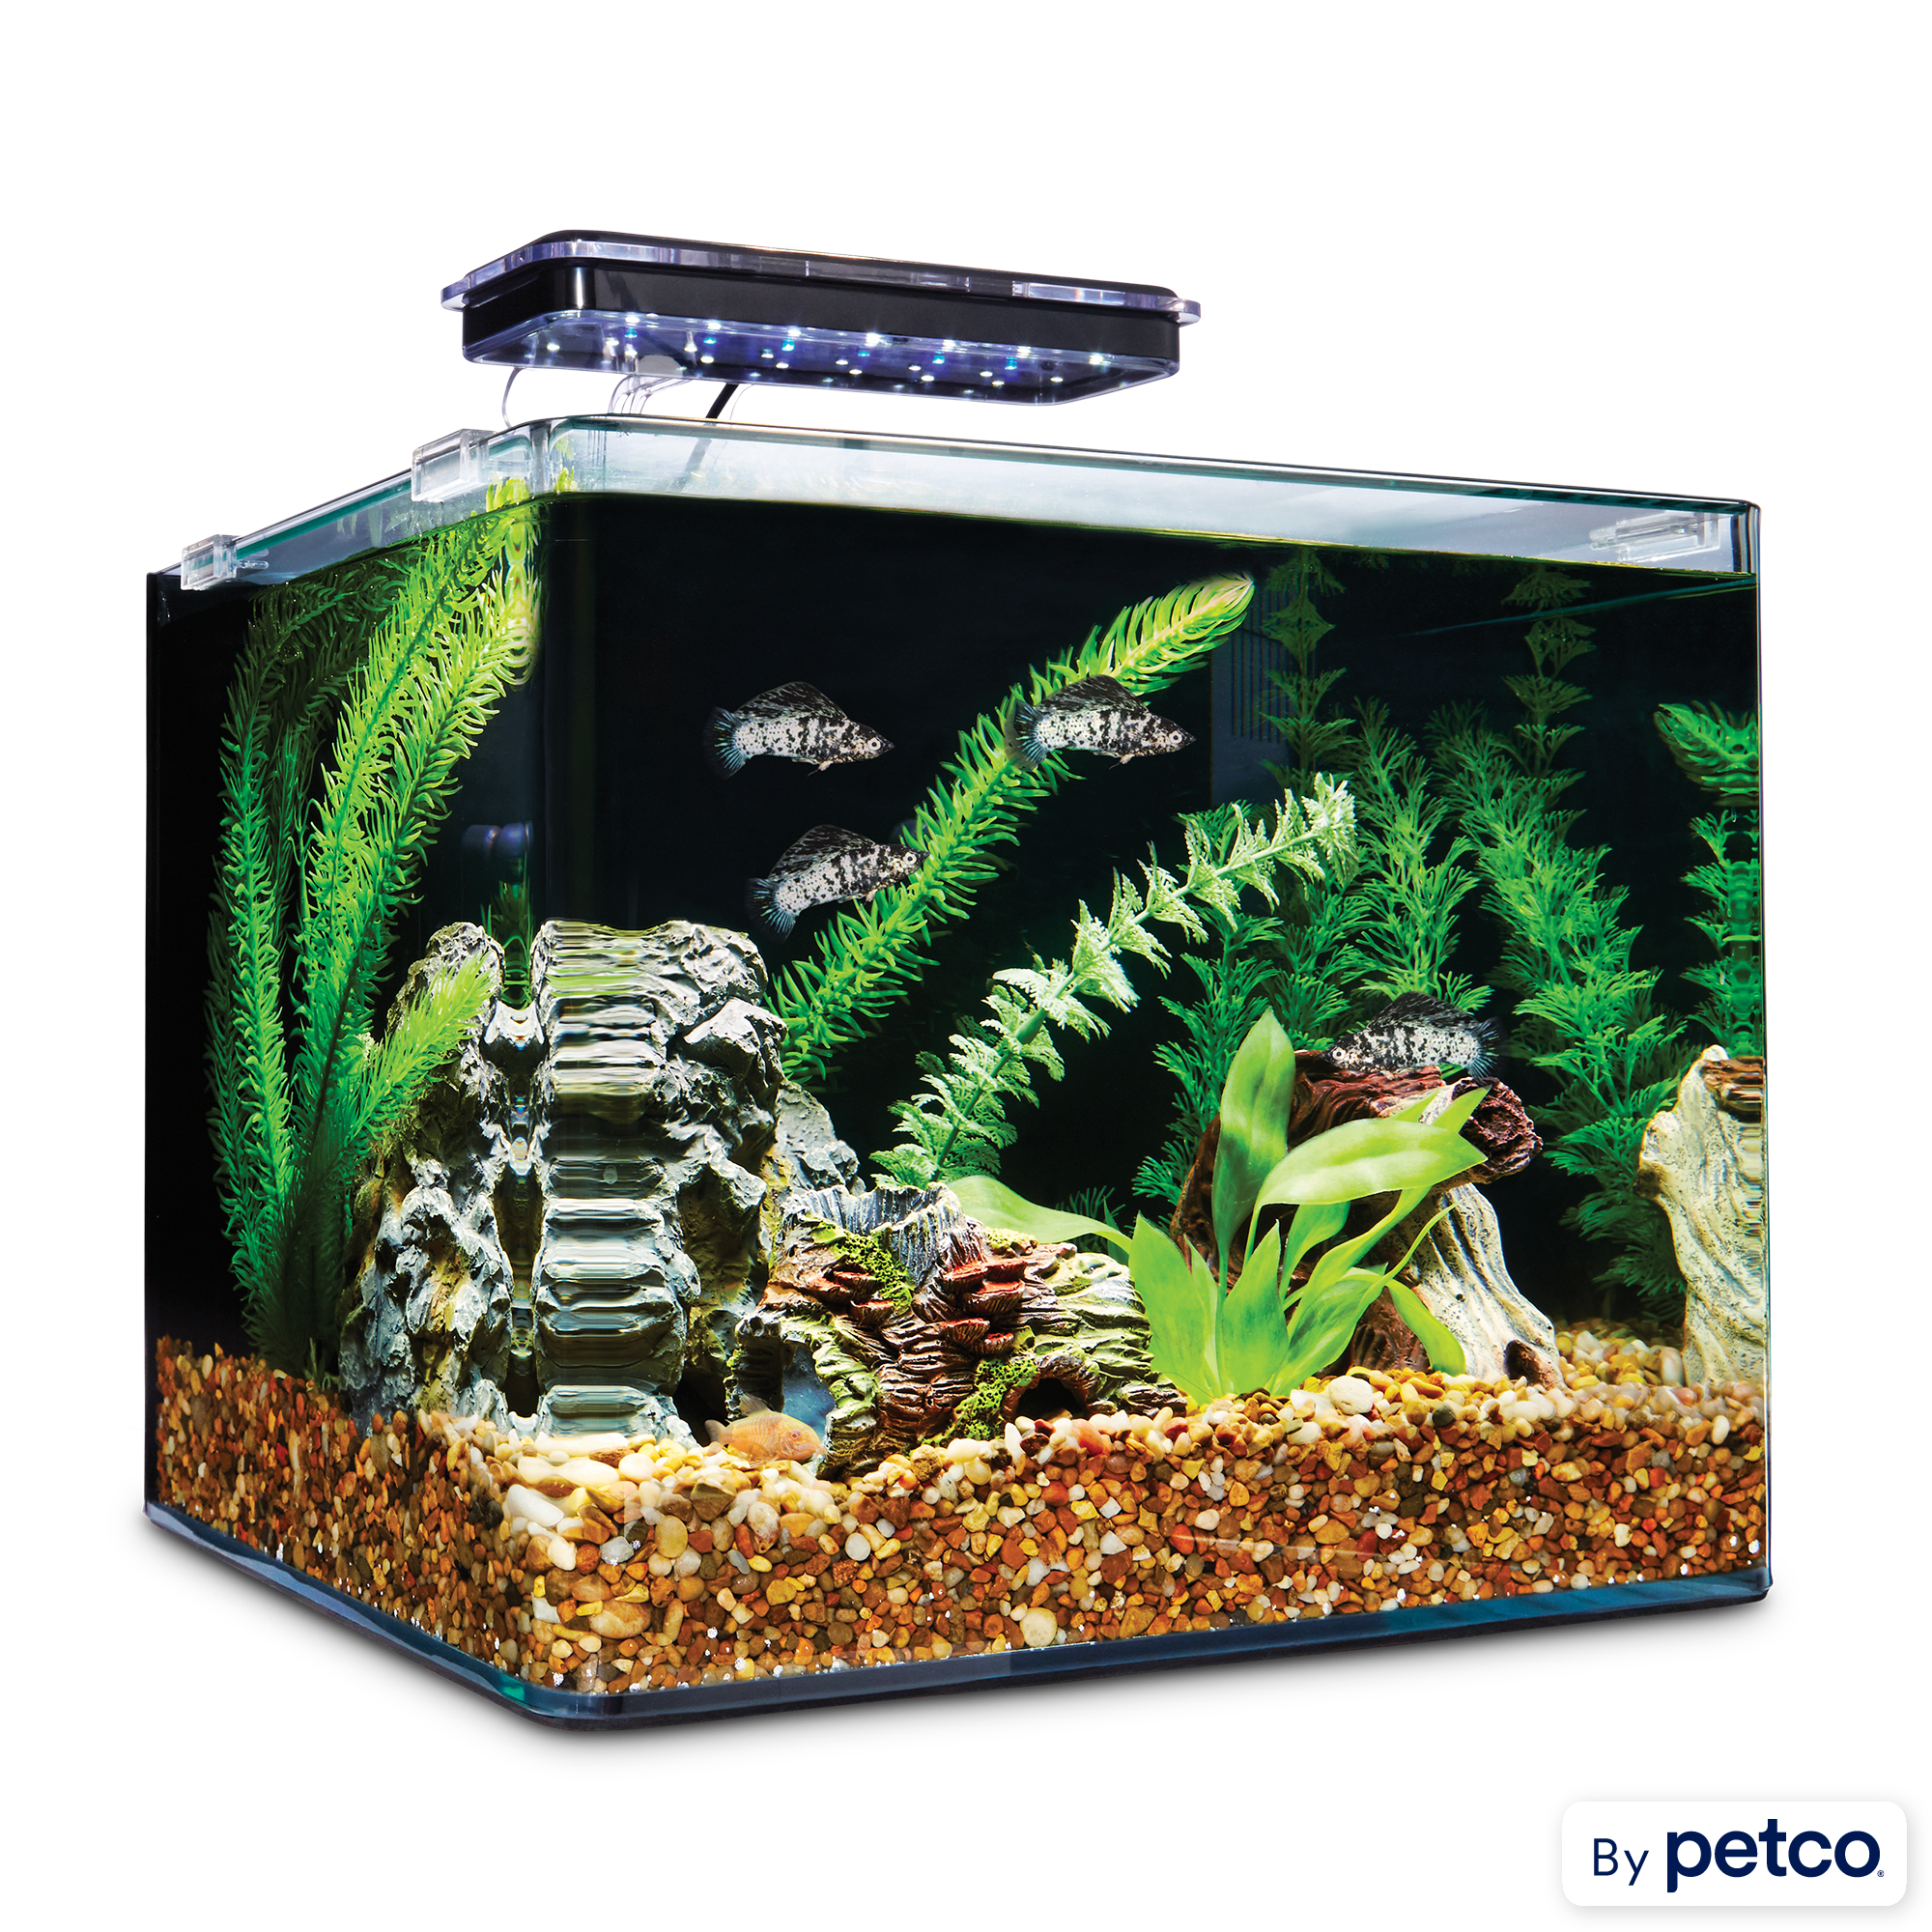 How to Select a Tank for a Freshwater Aquarium